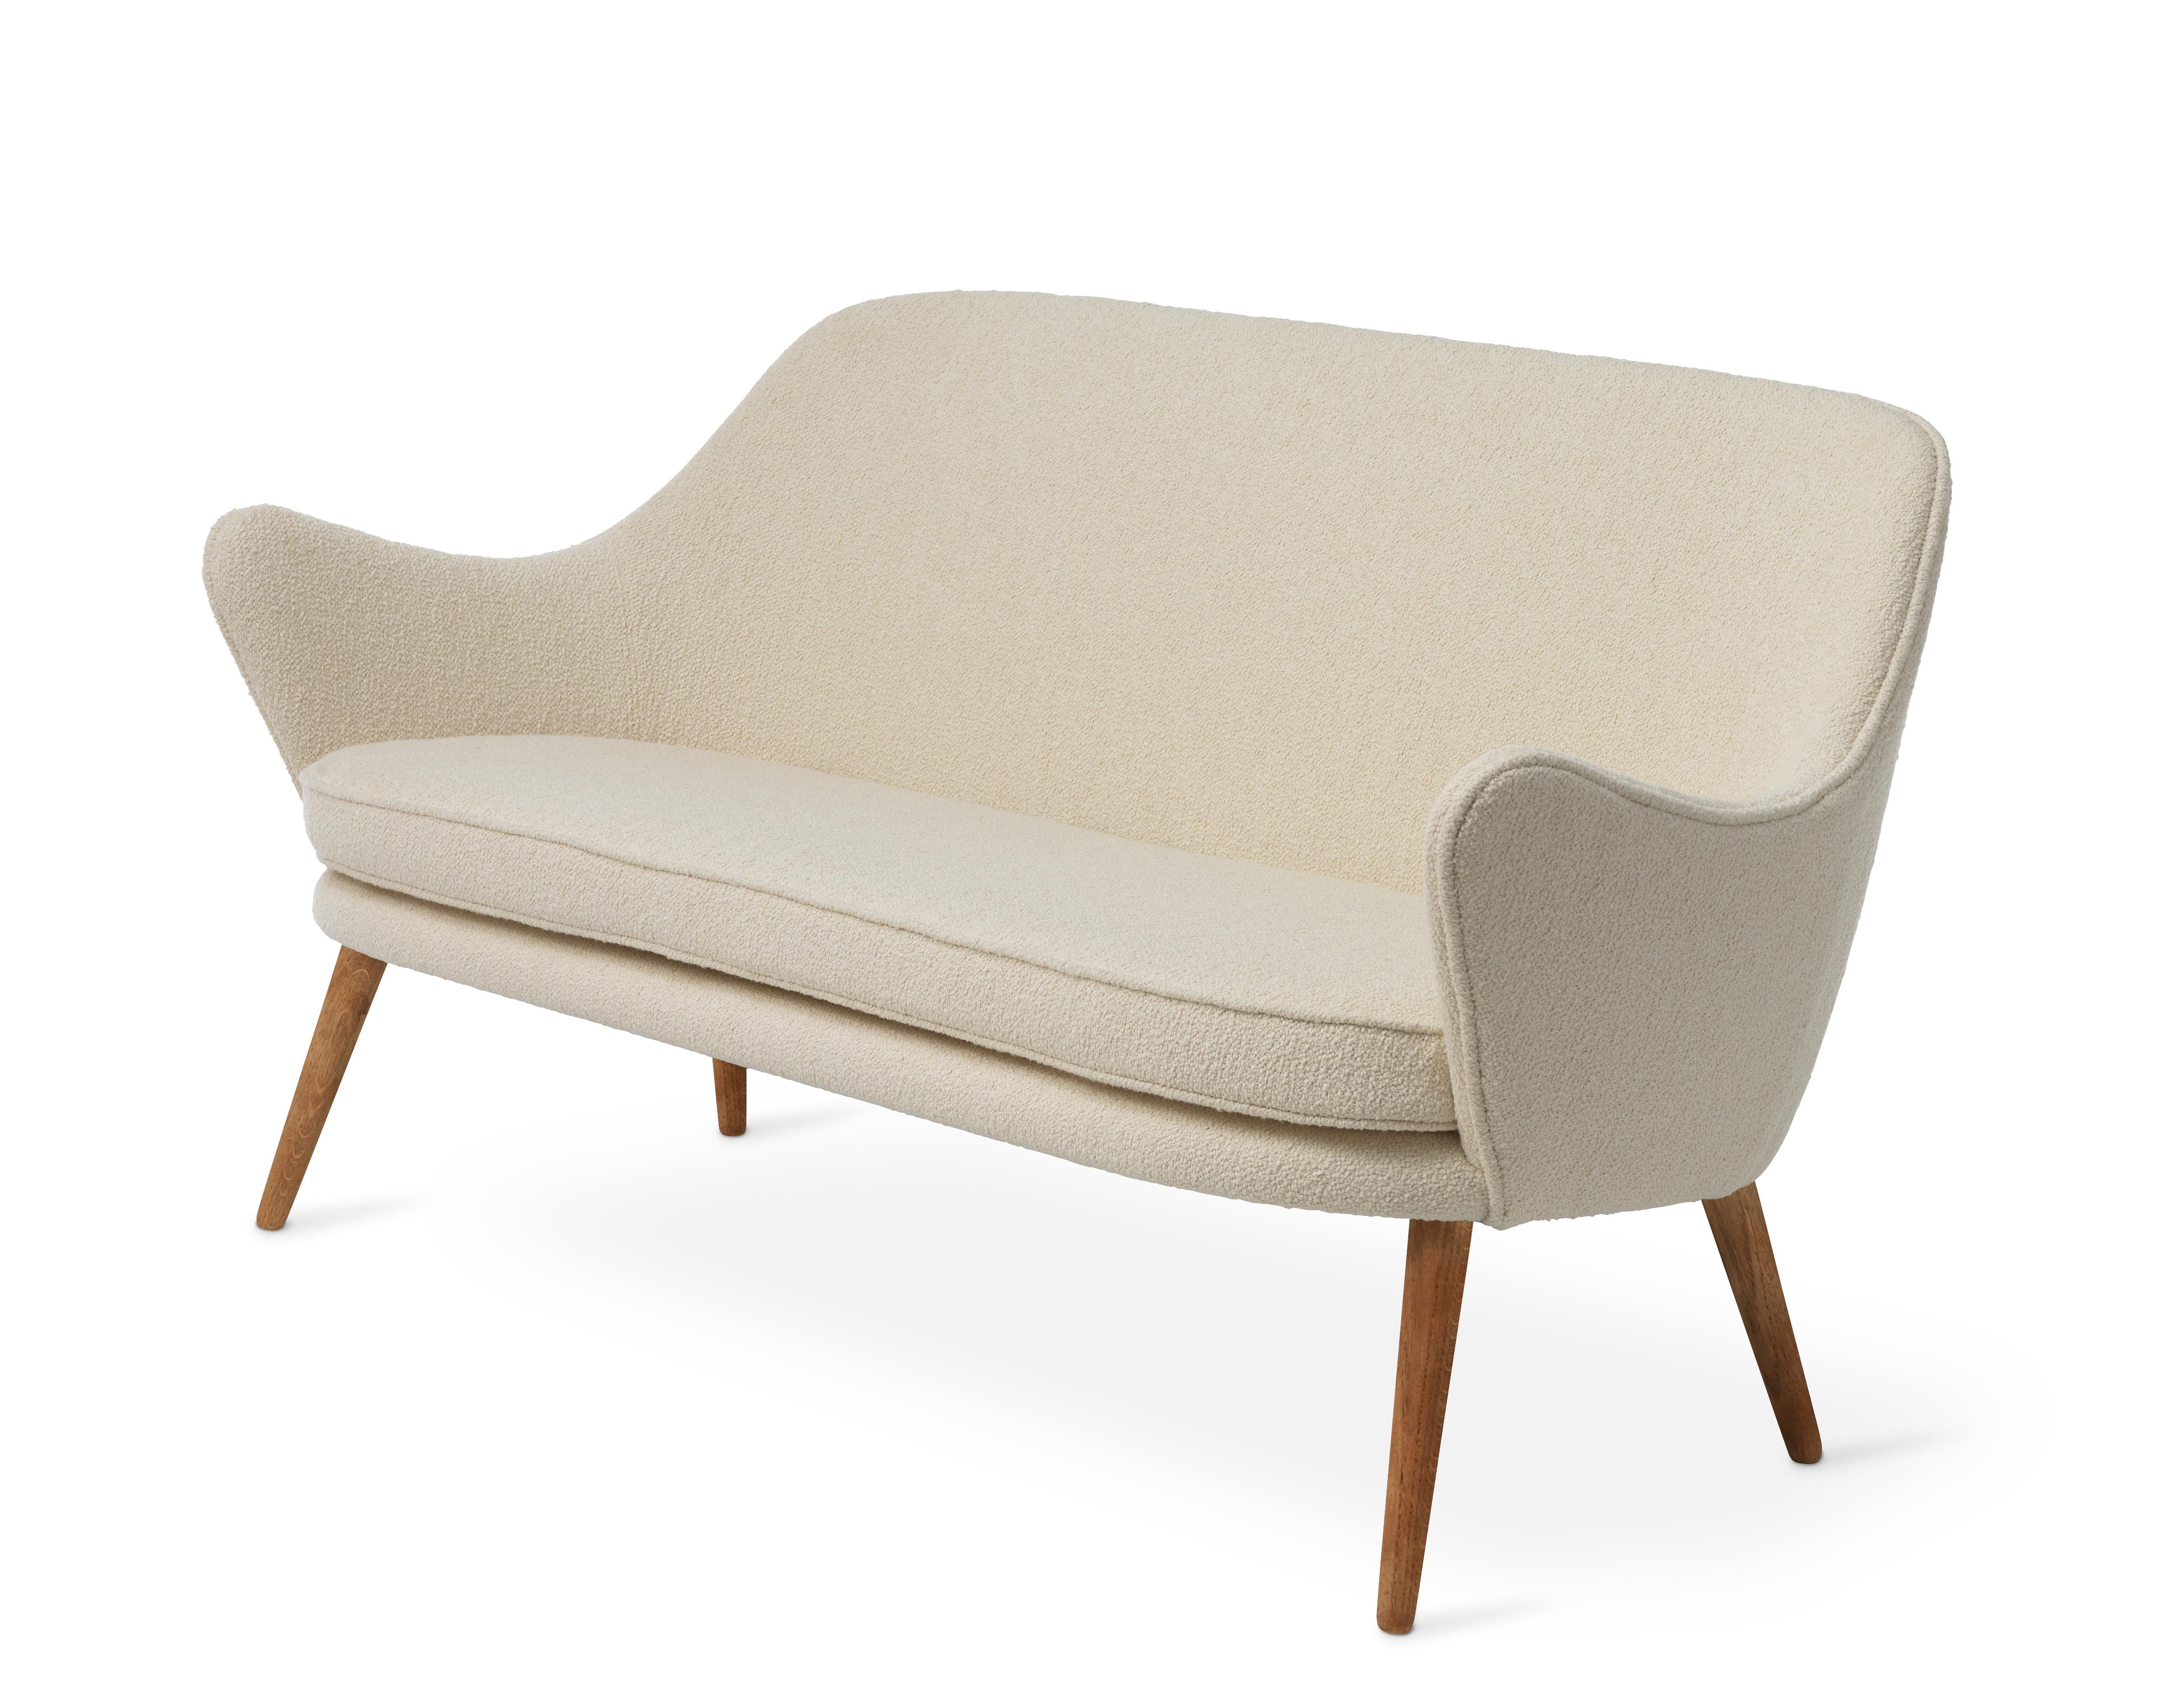 For Sale: White (Barnum24) Dwell 2-Seat Sofa, by Hans Olsen from Warm Nordic 2